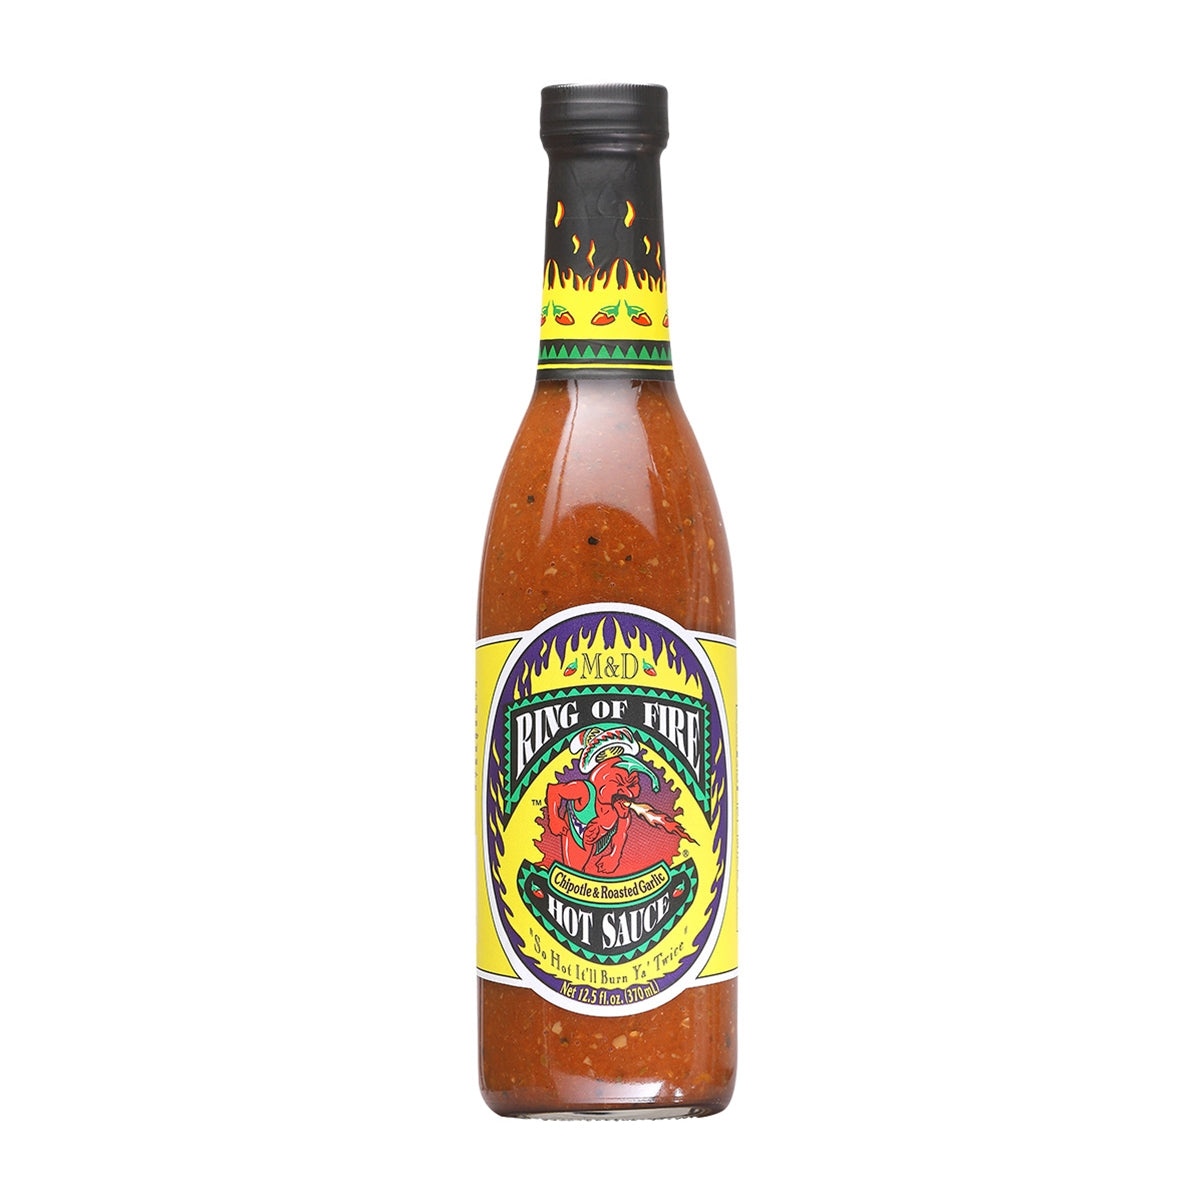 Hot Sauce Ring of Fire Roasted Garlic Chipotle 12.5 oz Big Bottle Heat 7 $12.98